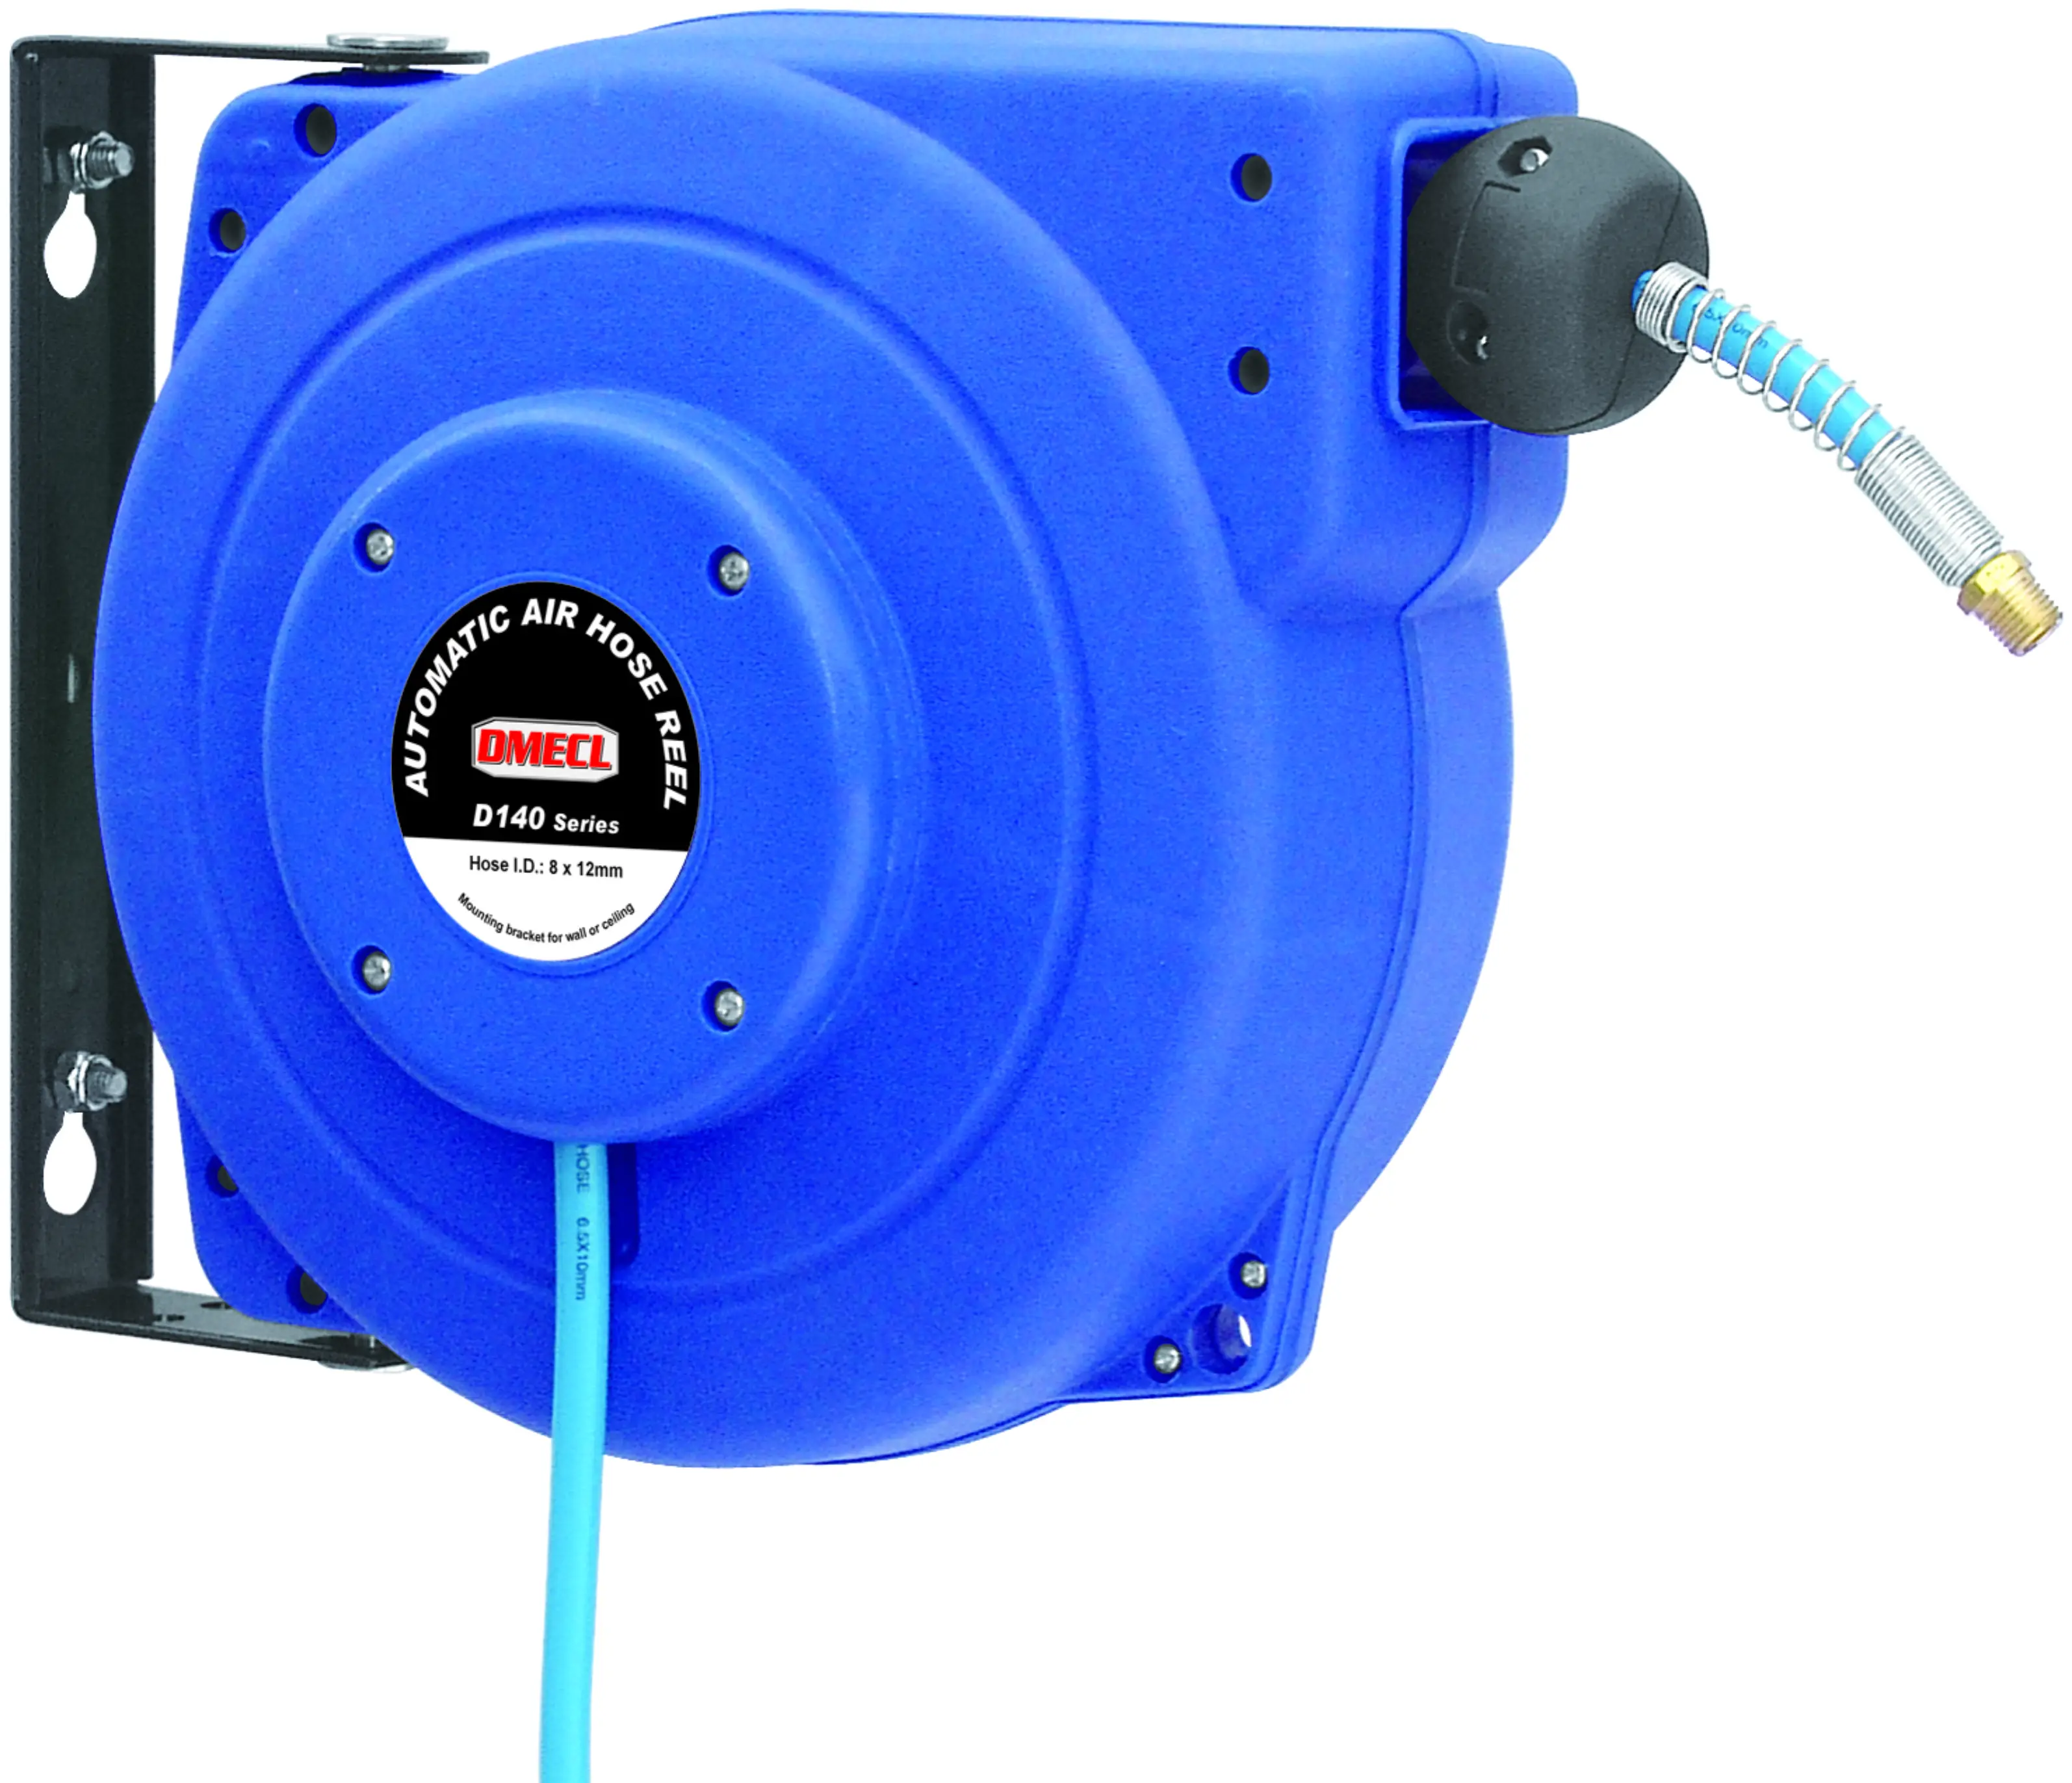 Wall mounted retractable extension automatic spring air hose reel